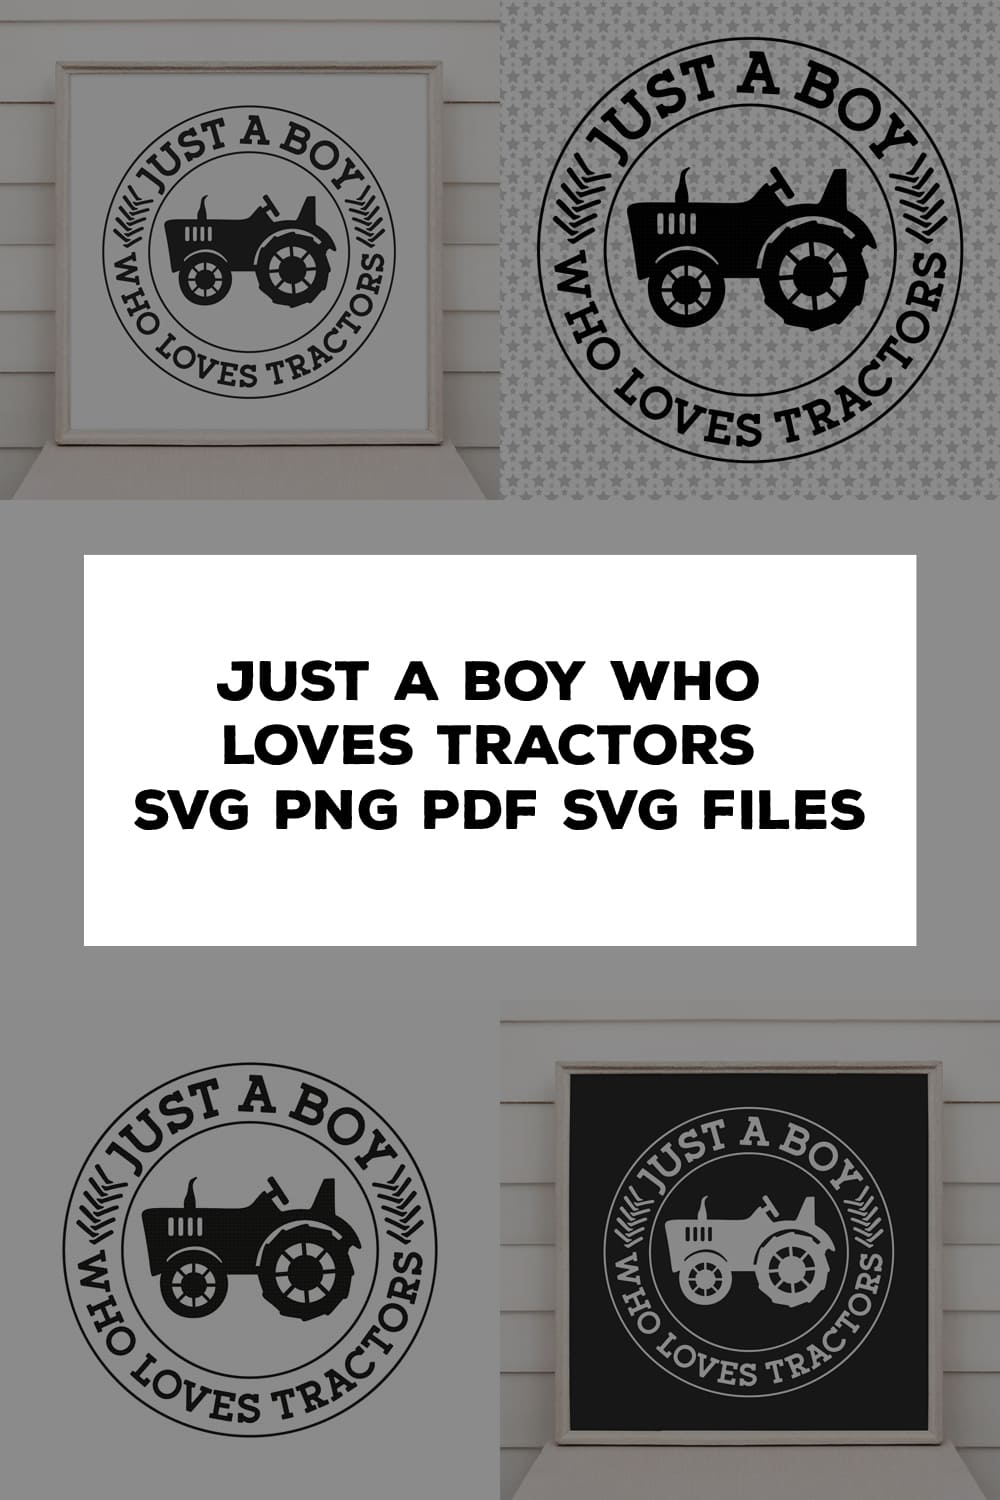 just a boy who loves tractors svg png pdf svg files clipart.